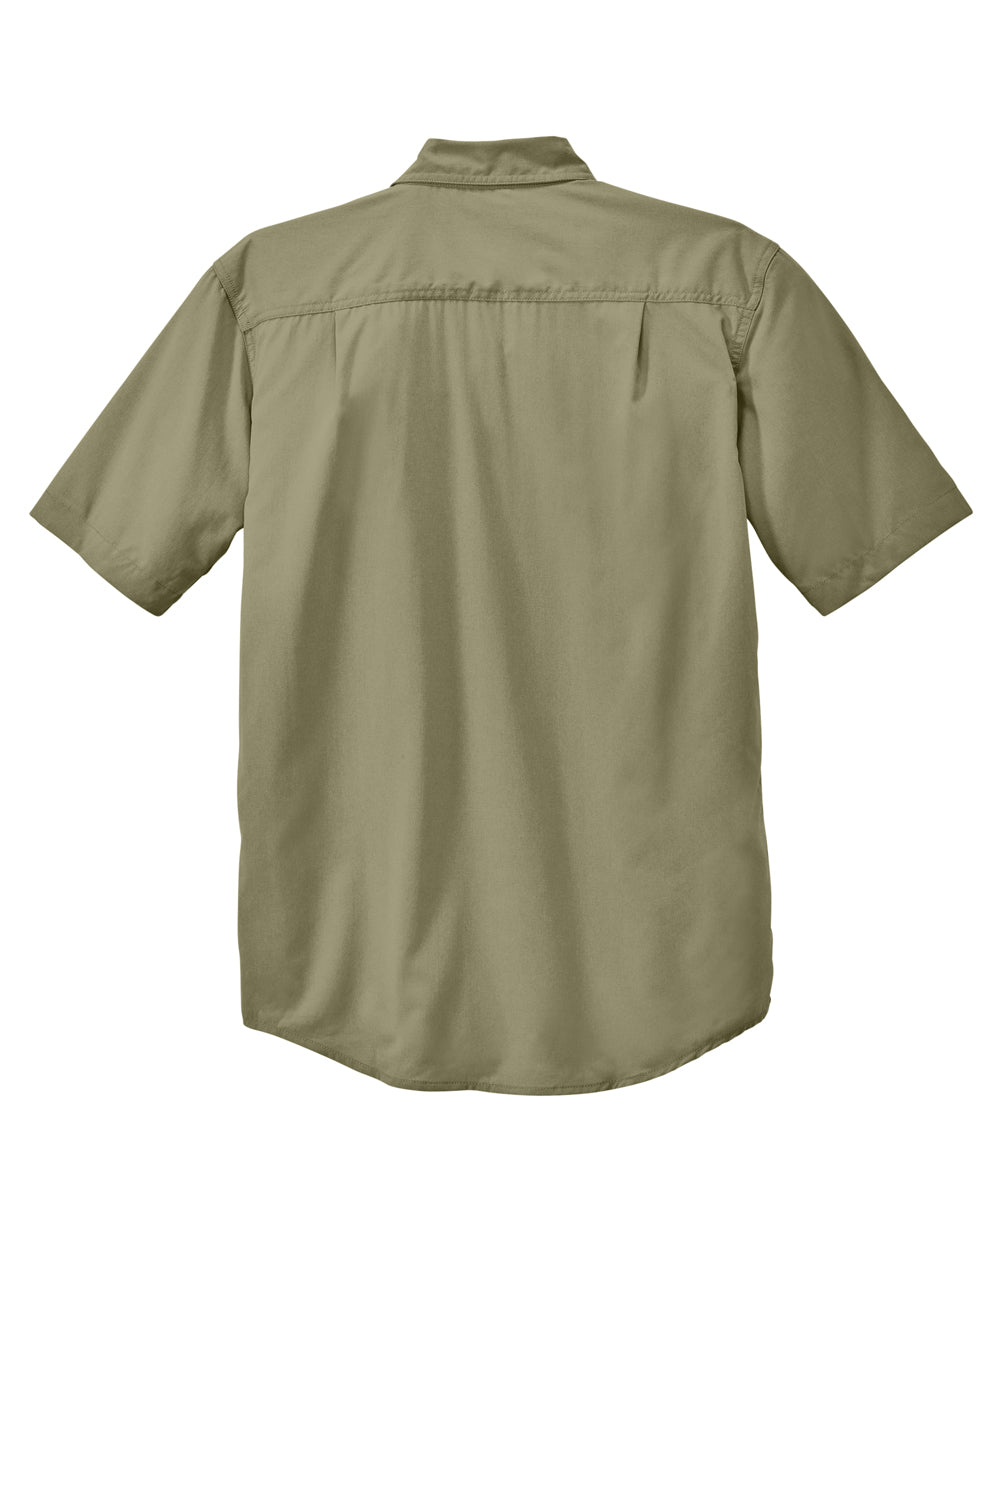 Carhartt CT105292 Mens Force Moisture Wicking Short Sleeve Button Down Shirt w/ Double Pockets Burnt Olive Green Flat Back